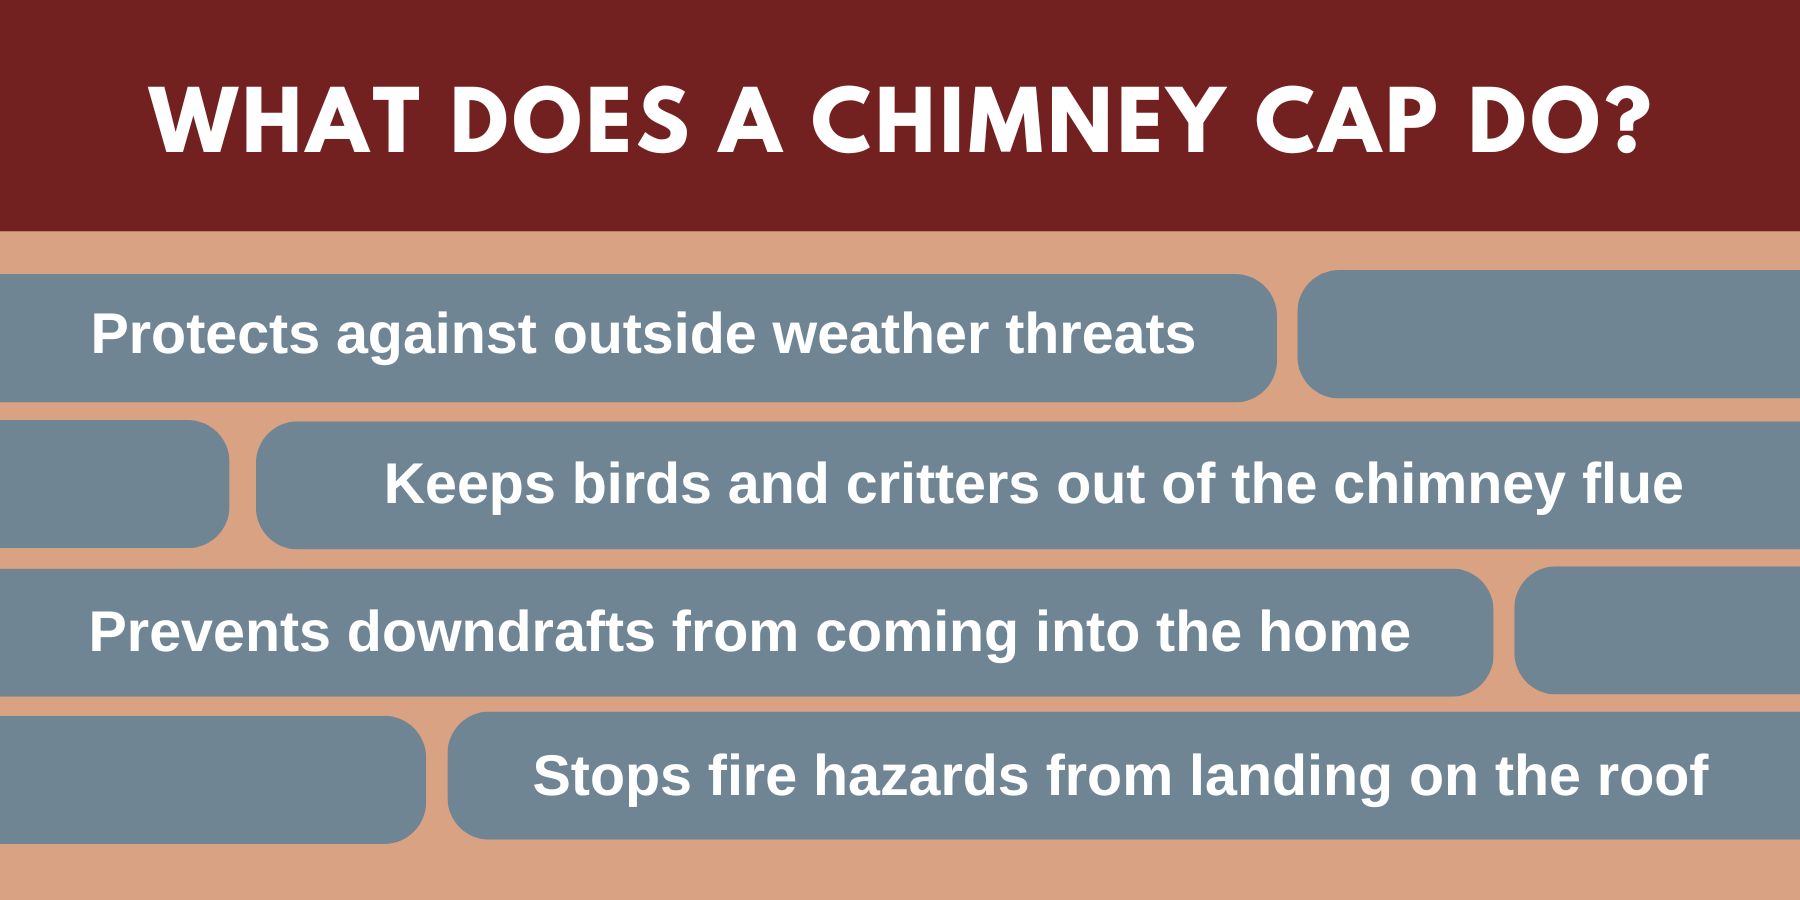 original infographic stating what a chimney cap does